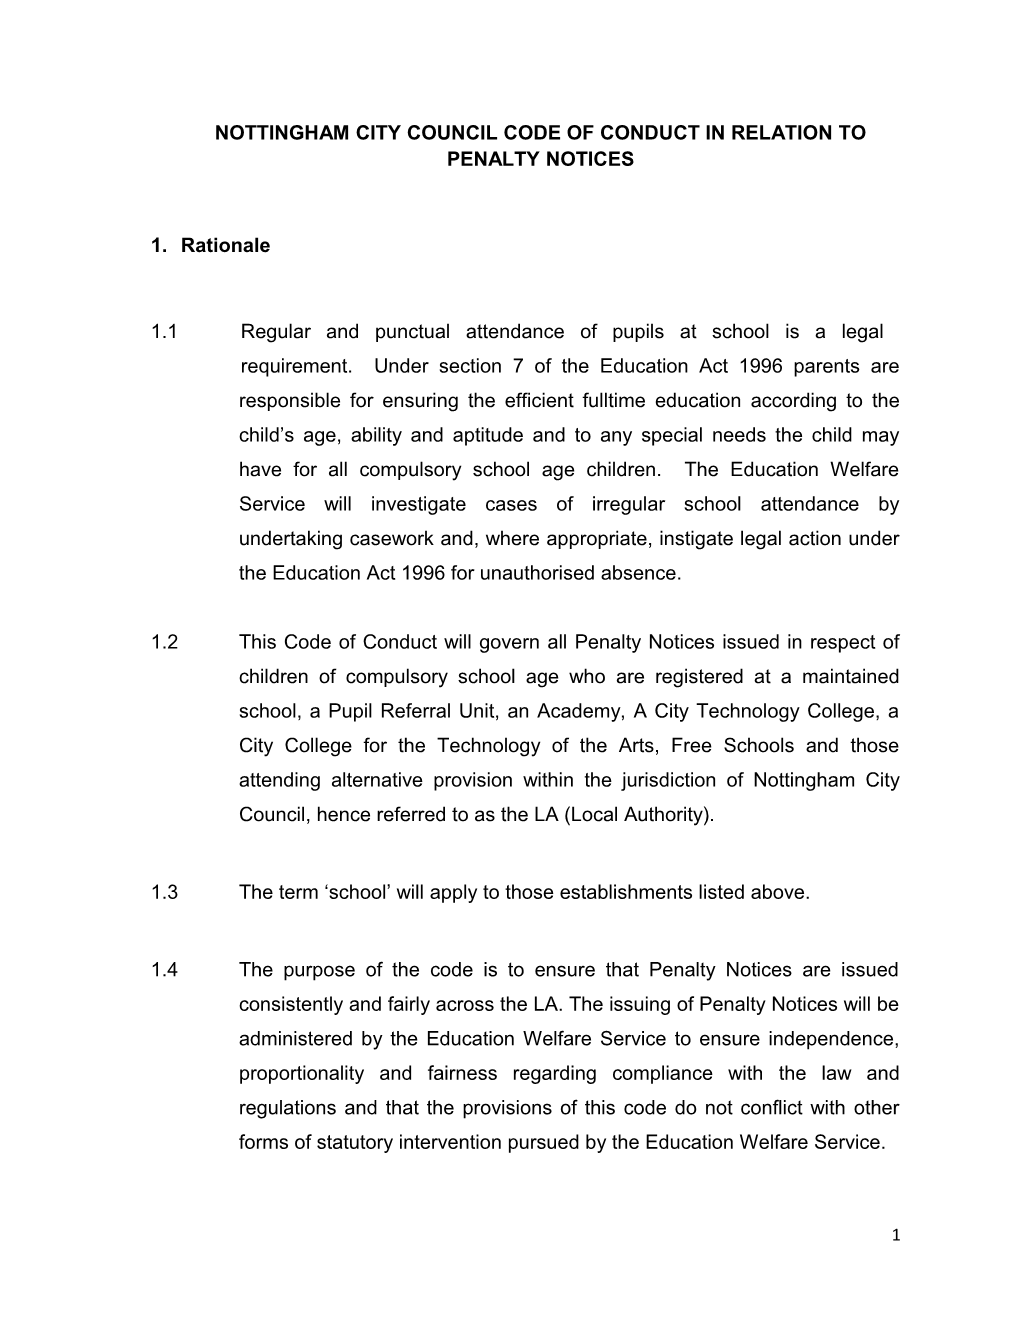 Nottingham City Council Code of Conduct in Relation to Penalty Notices